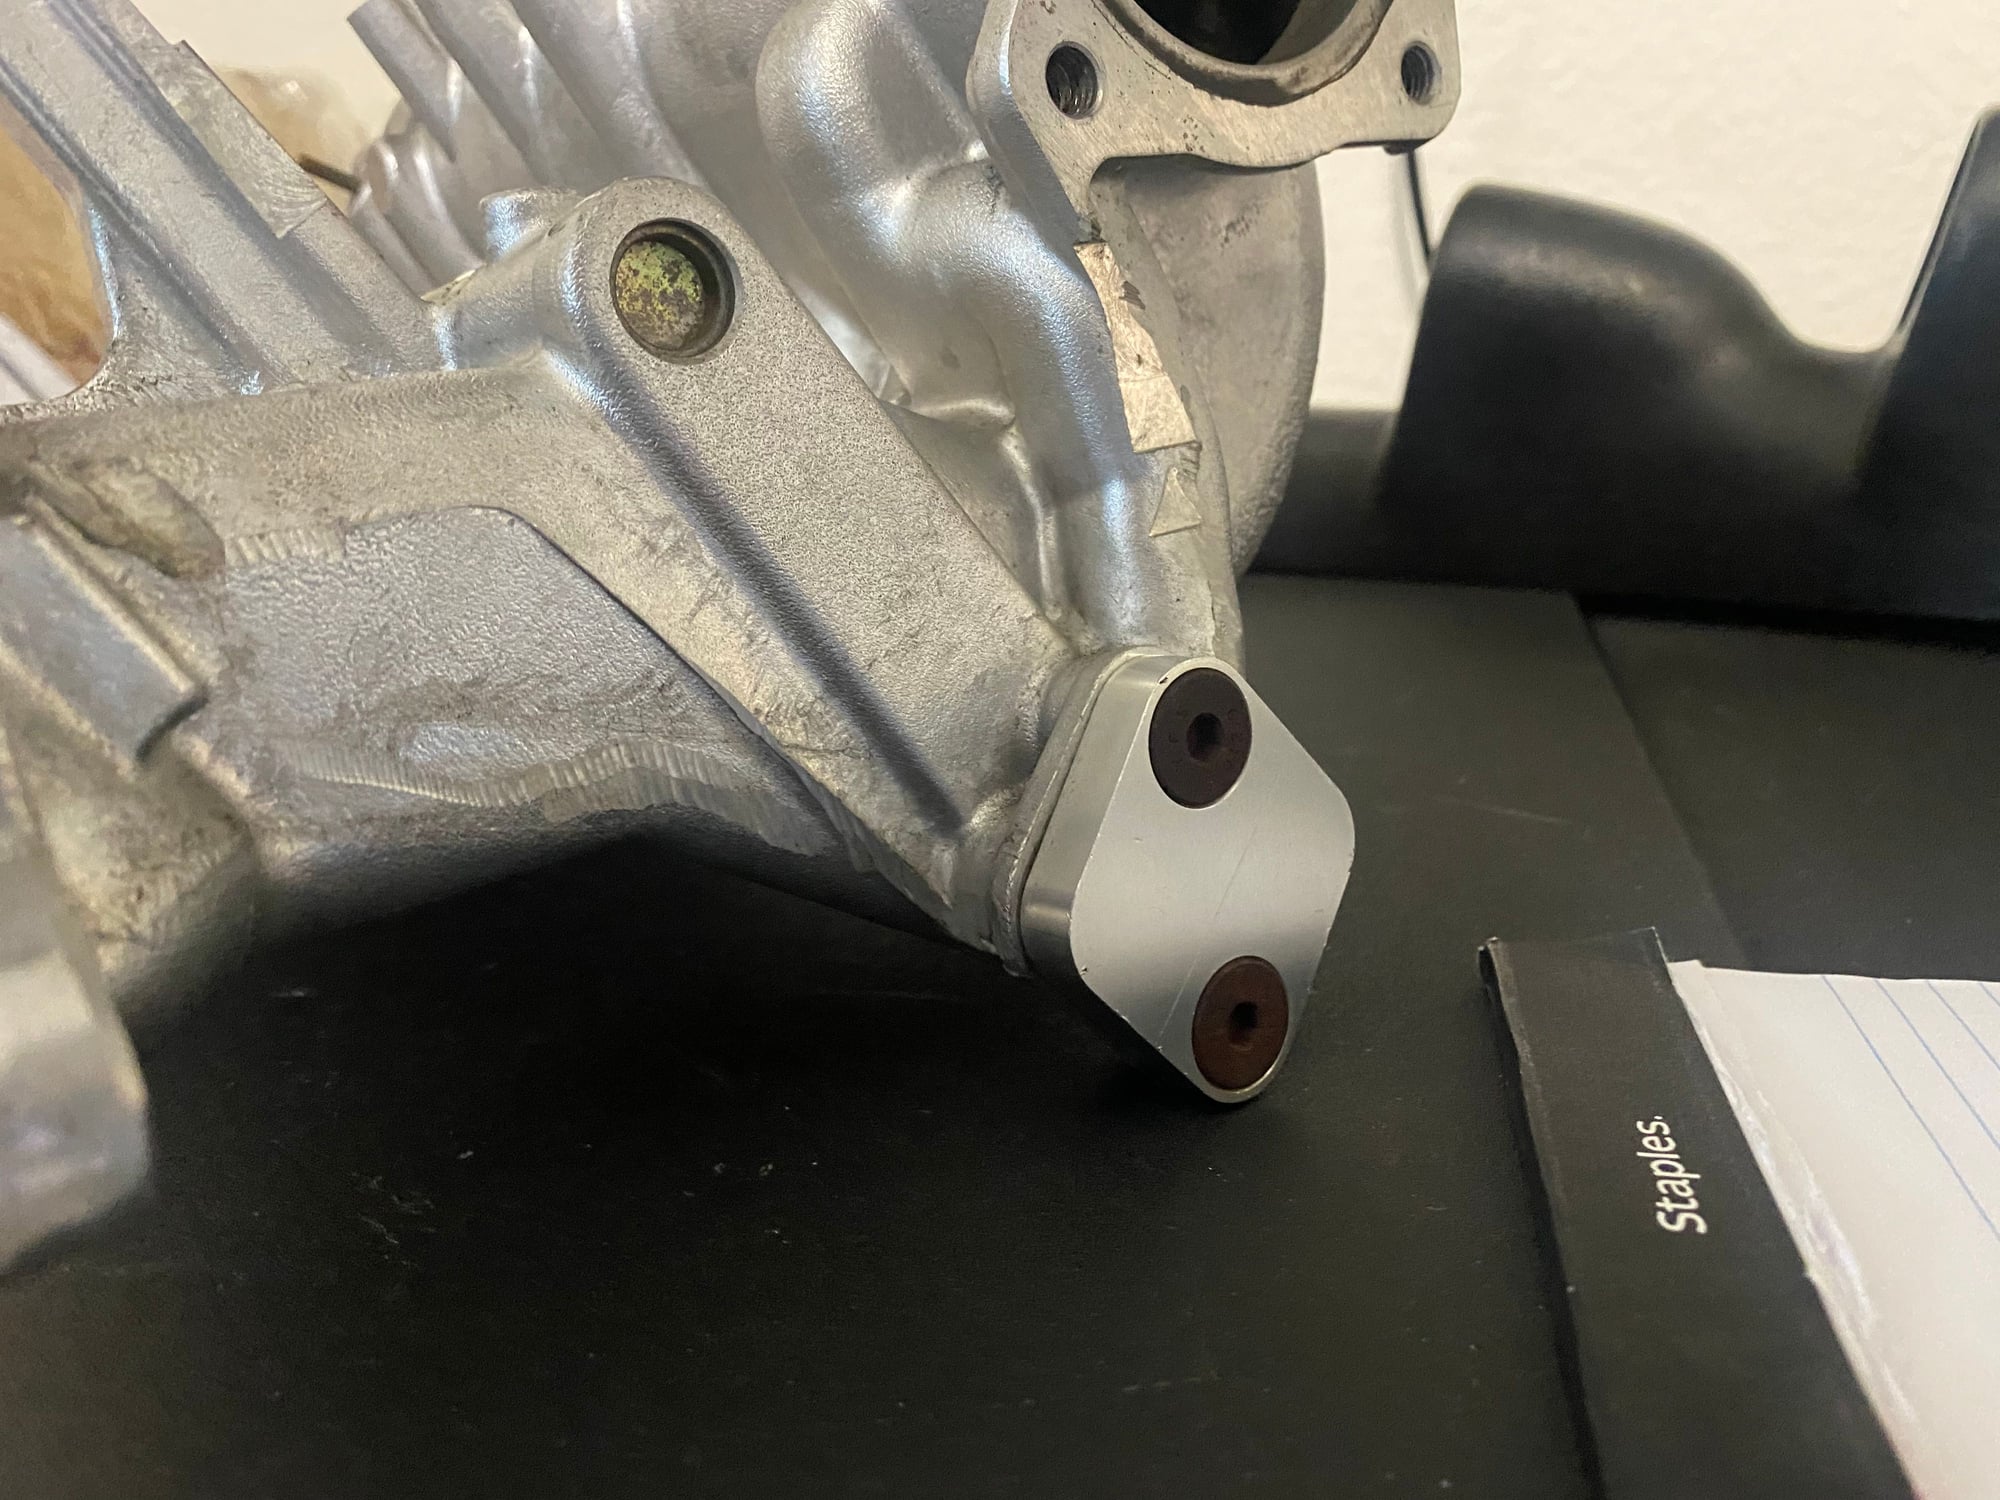 Engine - Intake/Fuel - Evo 8/9 Parts | Free Shipping | Better Offers - Used - 0  All Models - Plano, TX 75025, United States